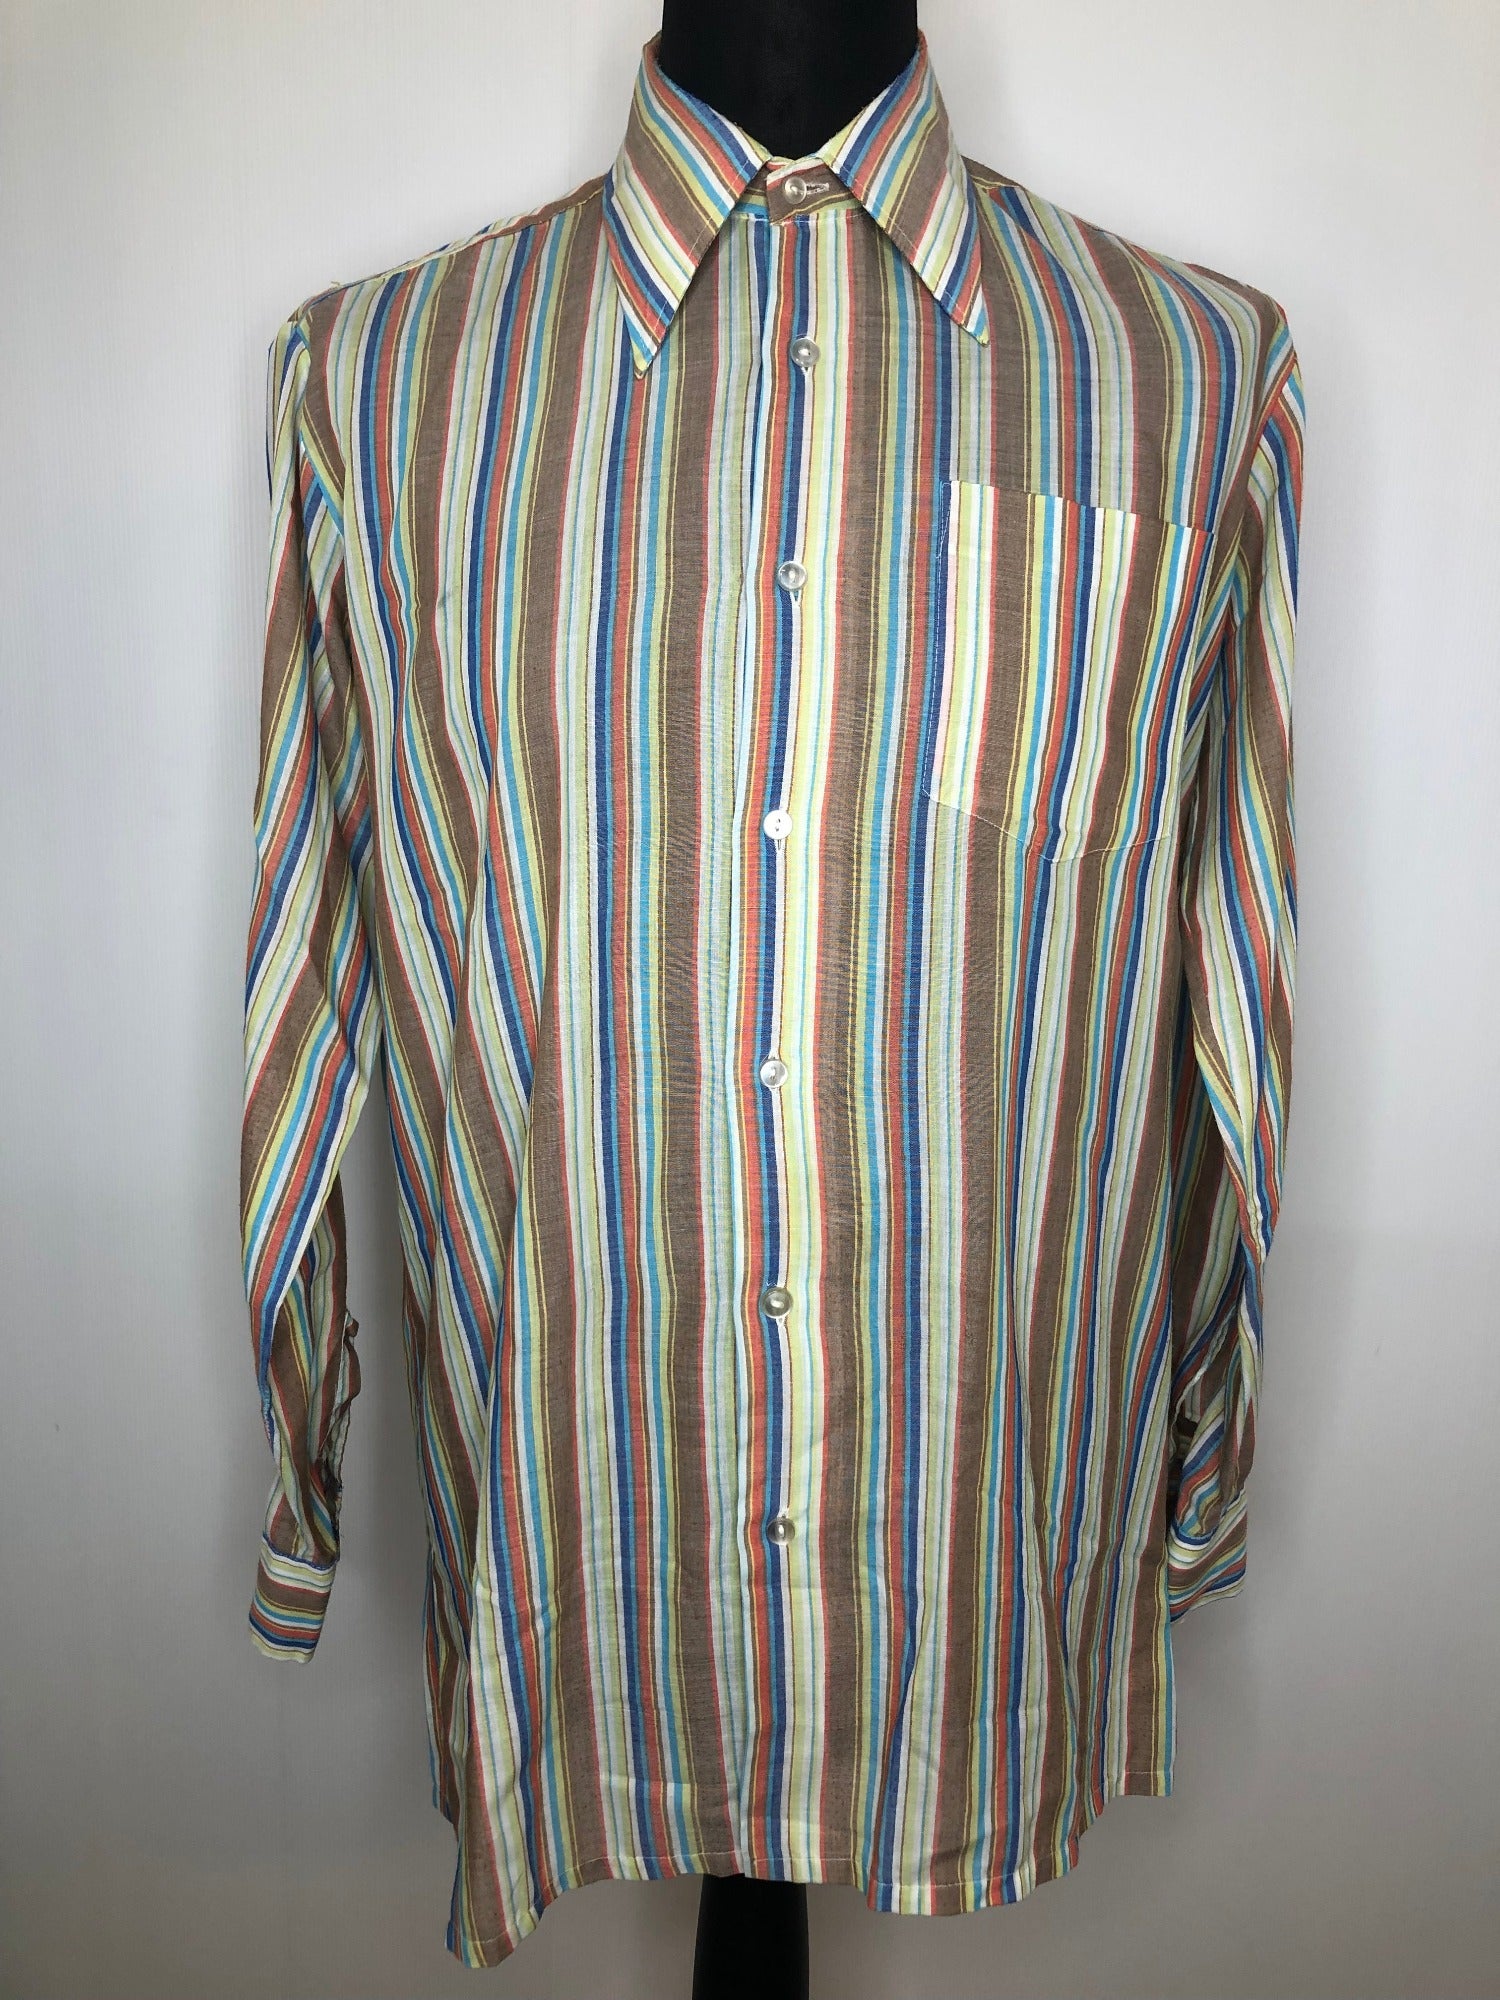 Vintage 1970s Dagger Collar Striped Shirt by Bugelfrei - Size L ...